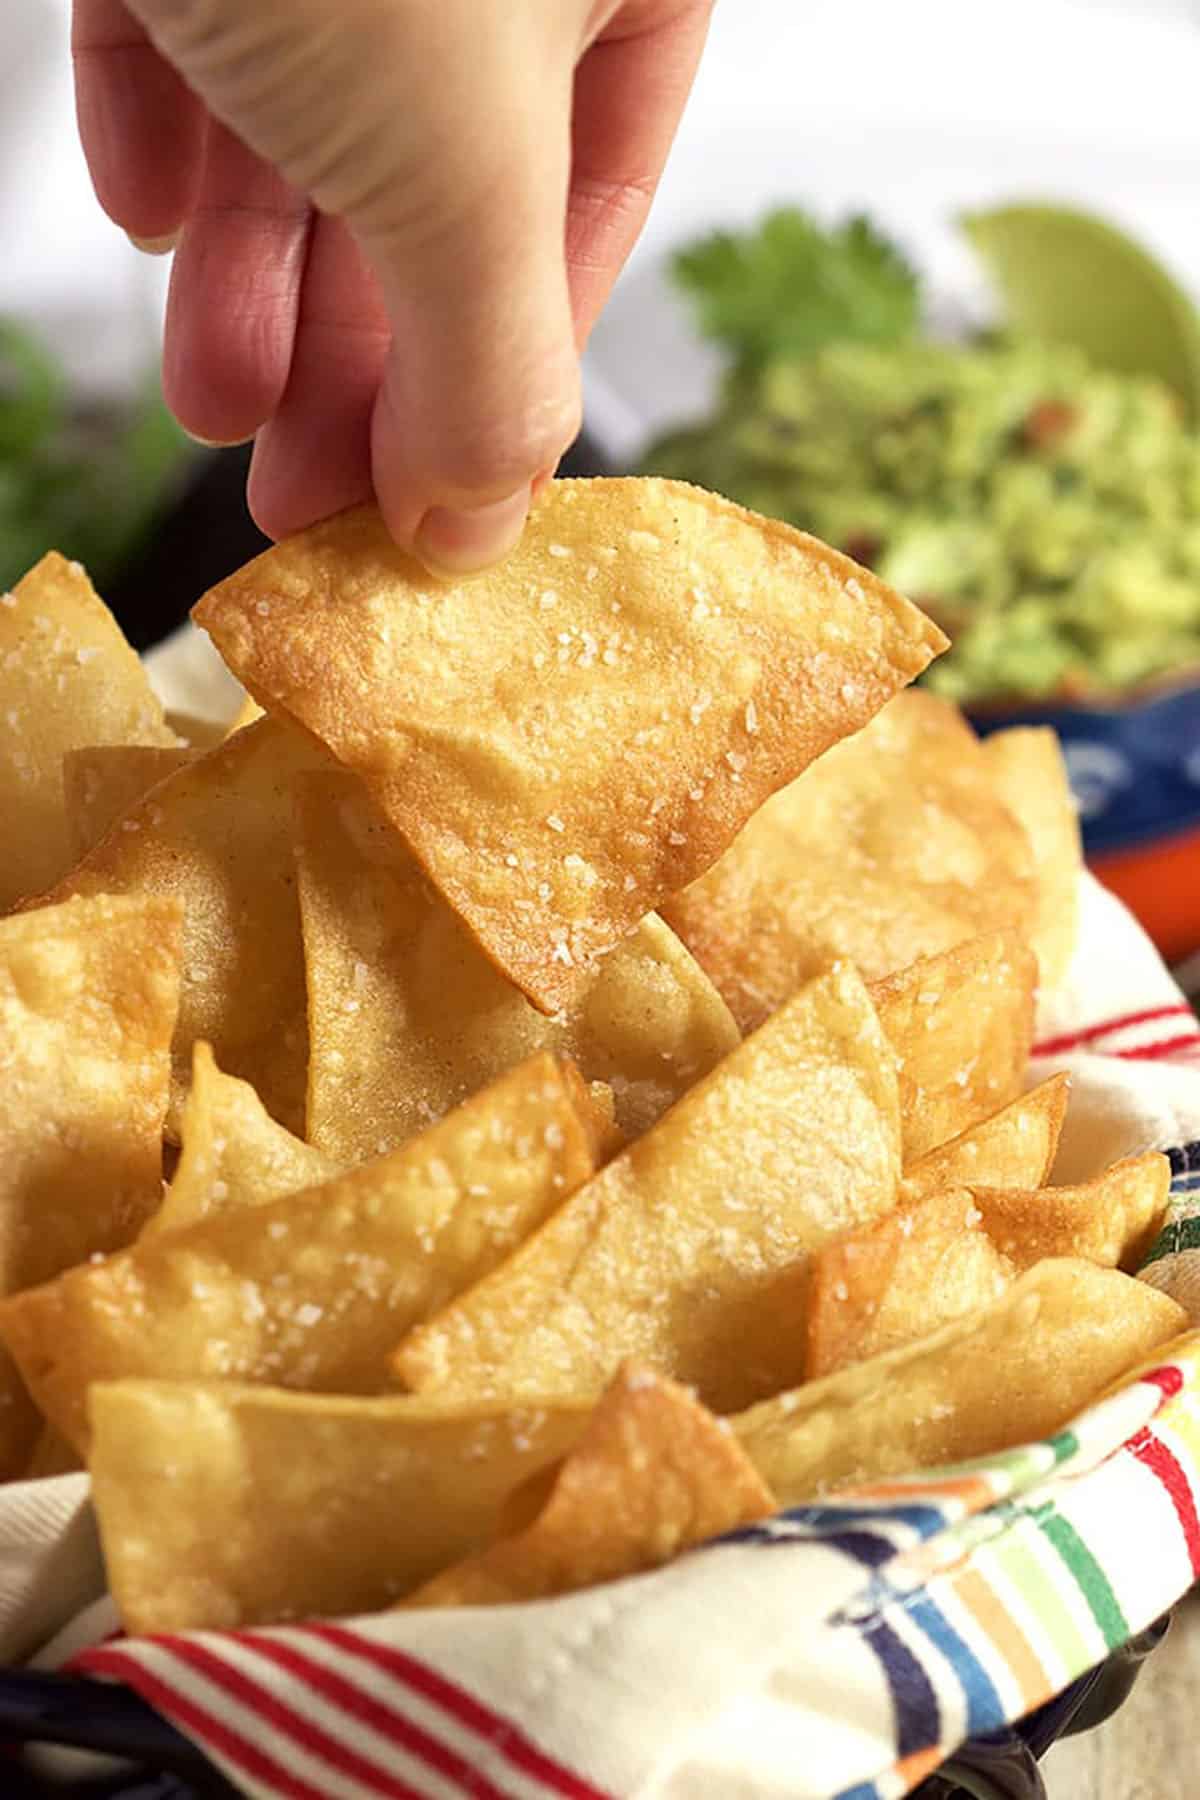 A hand picking up a tortilla chip from a bowl of tortilla chips.